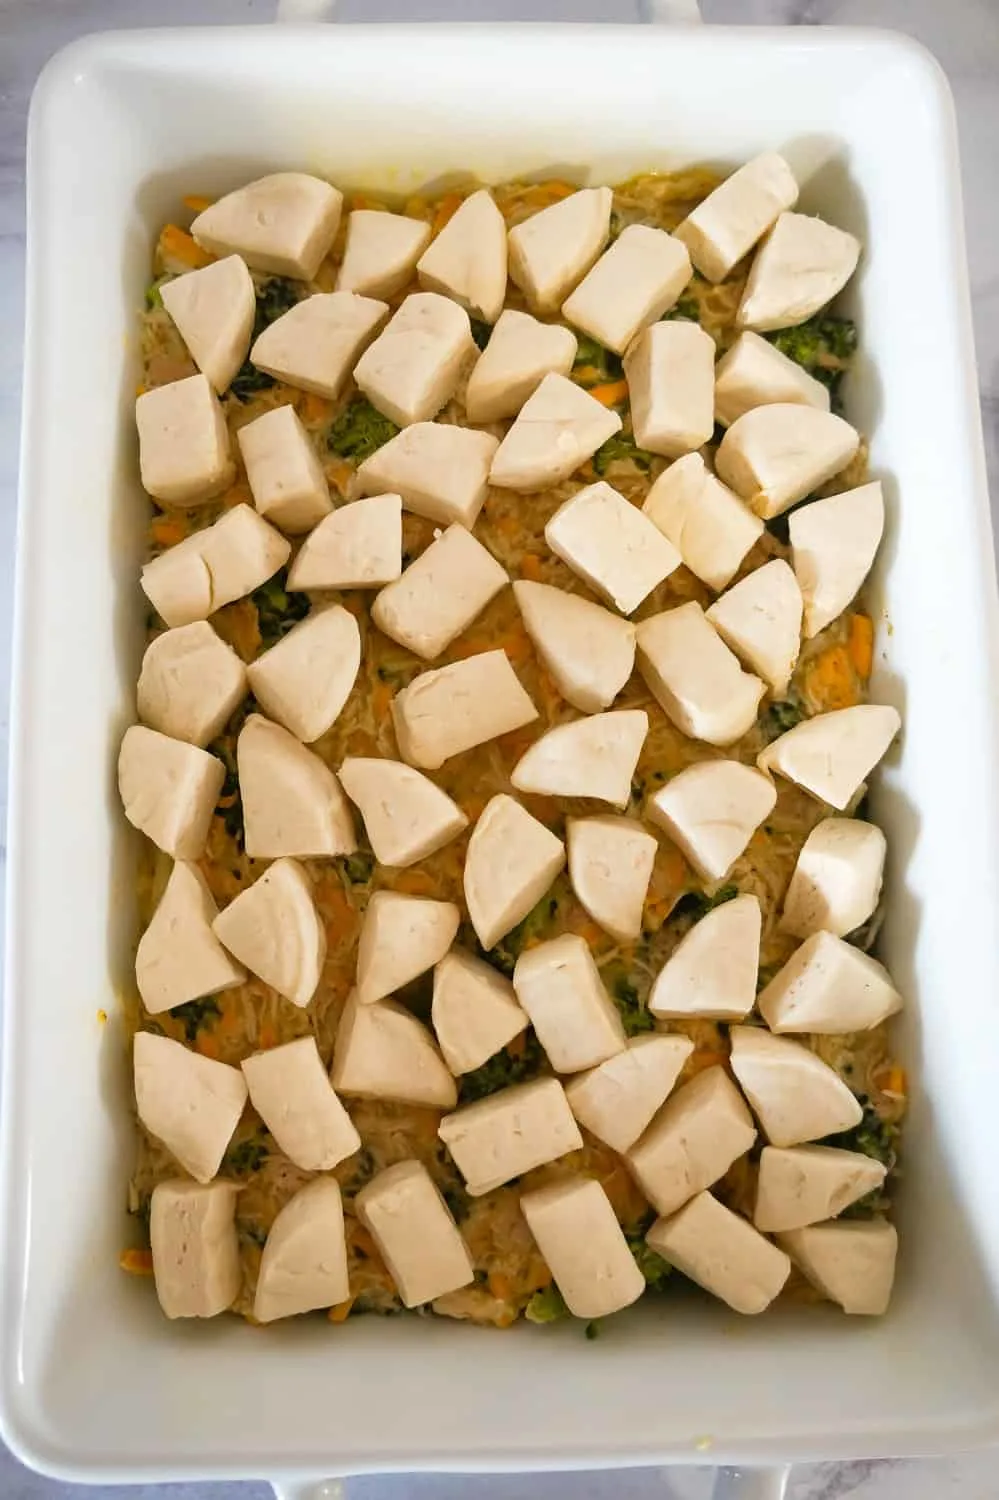 biscuit dough pieces on top of chicken and broccoli mixture in a baking dish